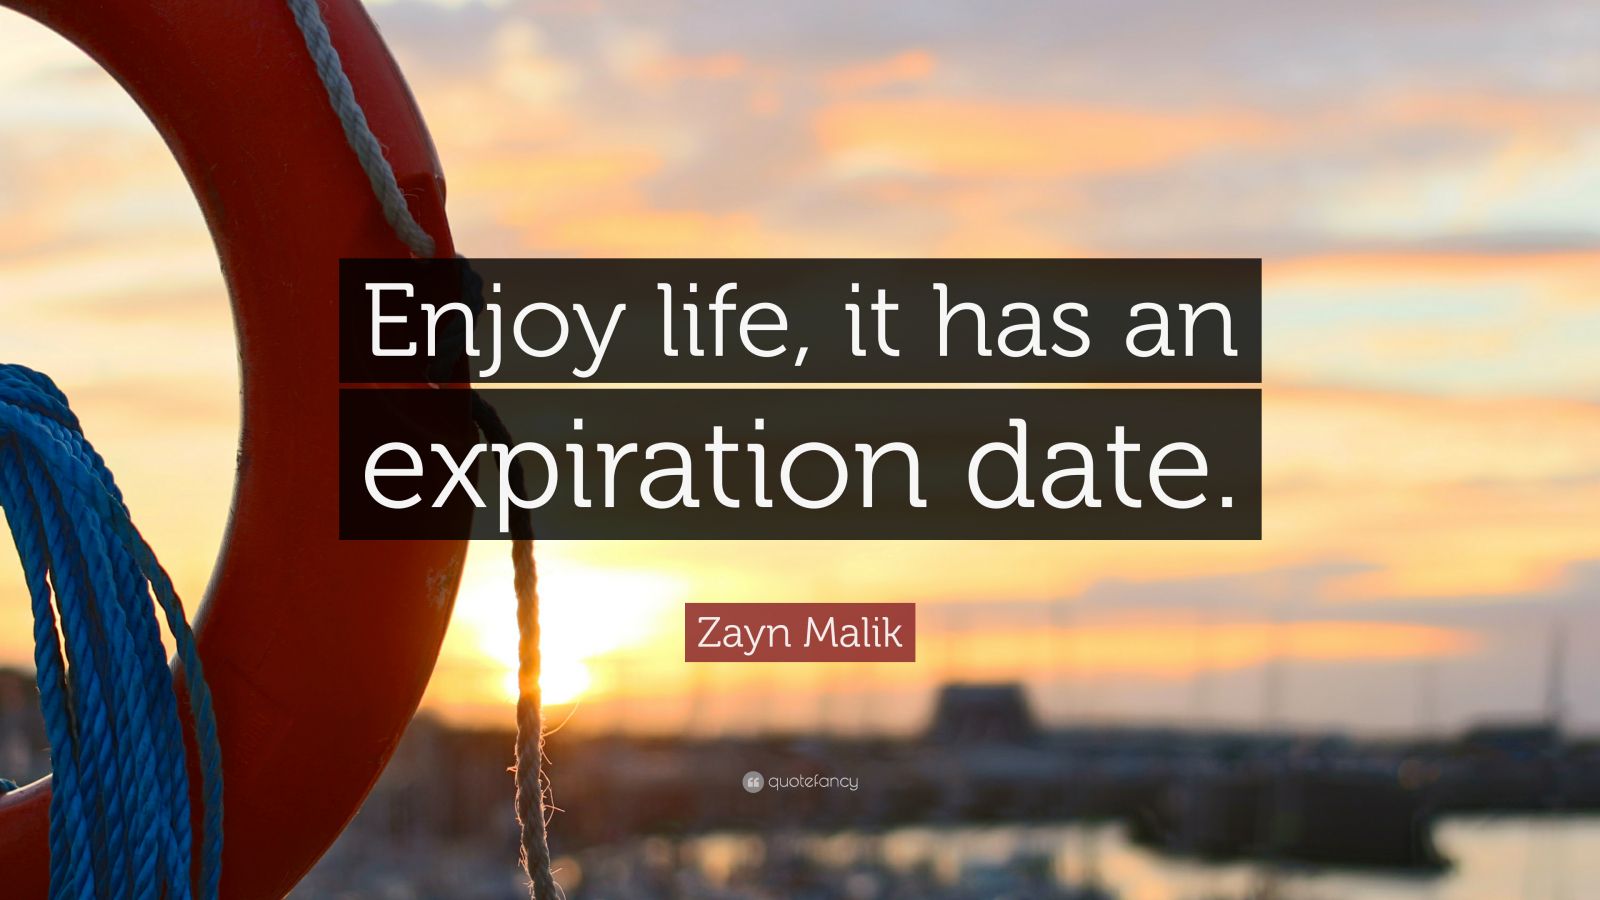 Zayn Malik Quote: "Enjoy life, it has an expiration date." (12 wallpapers) - Quotefancy